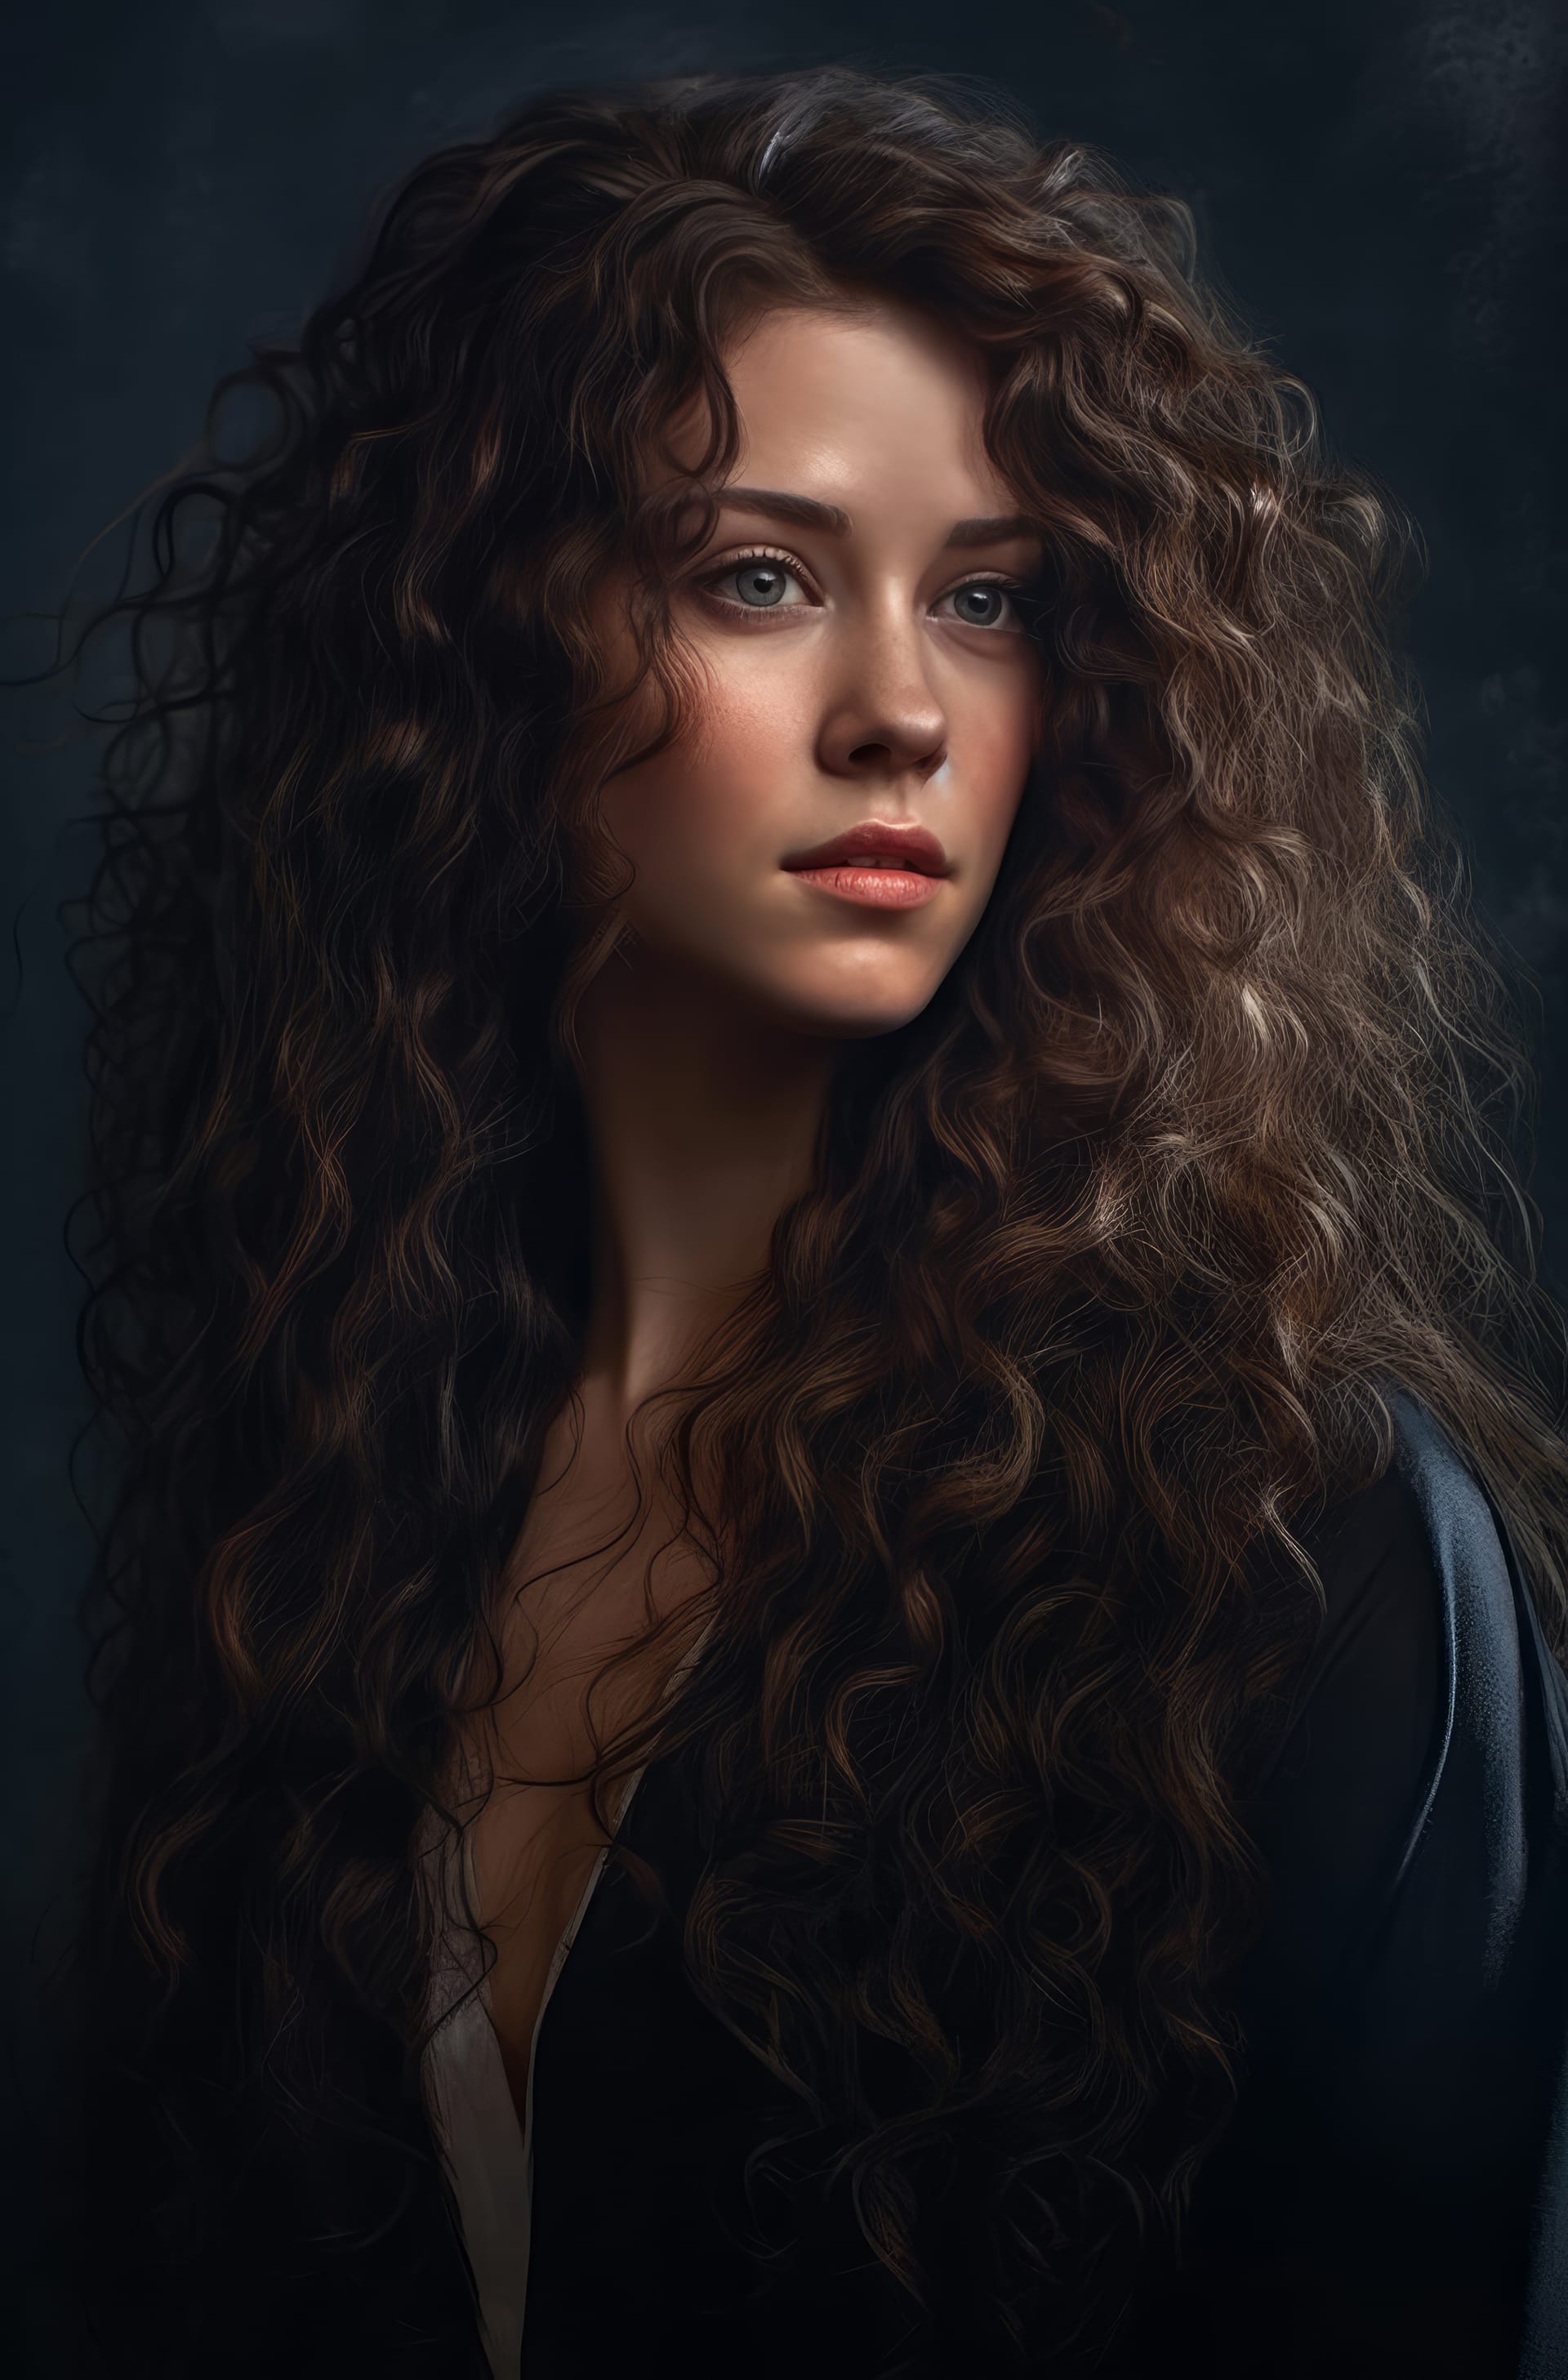 Balanced portraiture woman with long curly hair looks camera